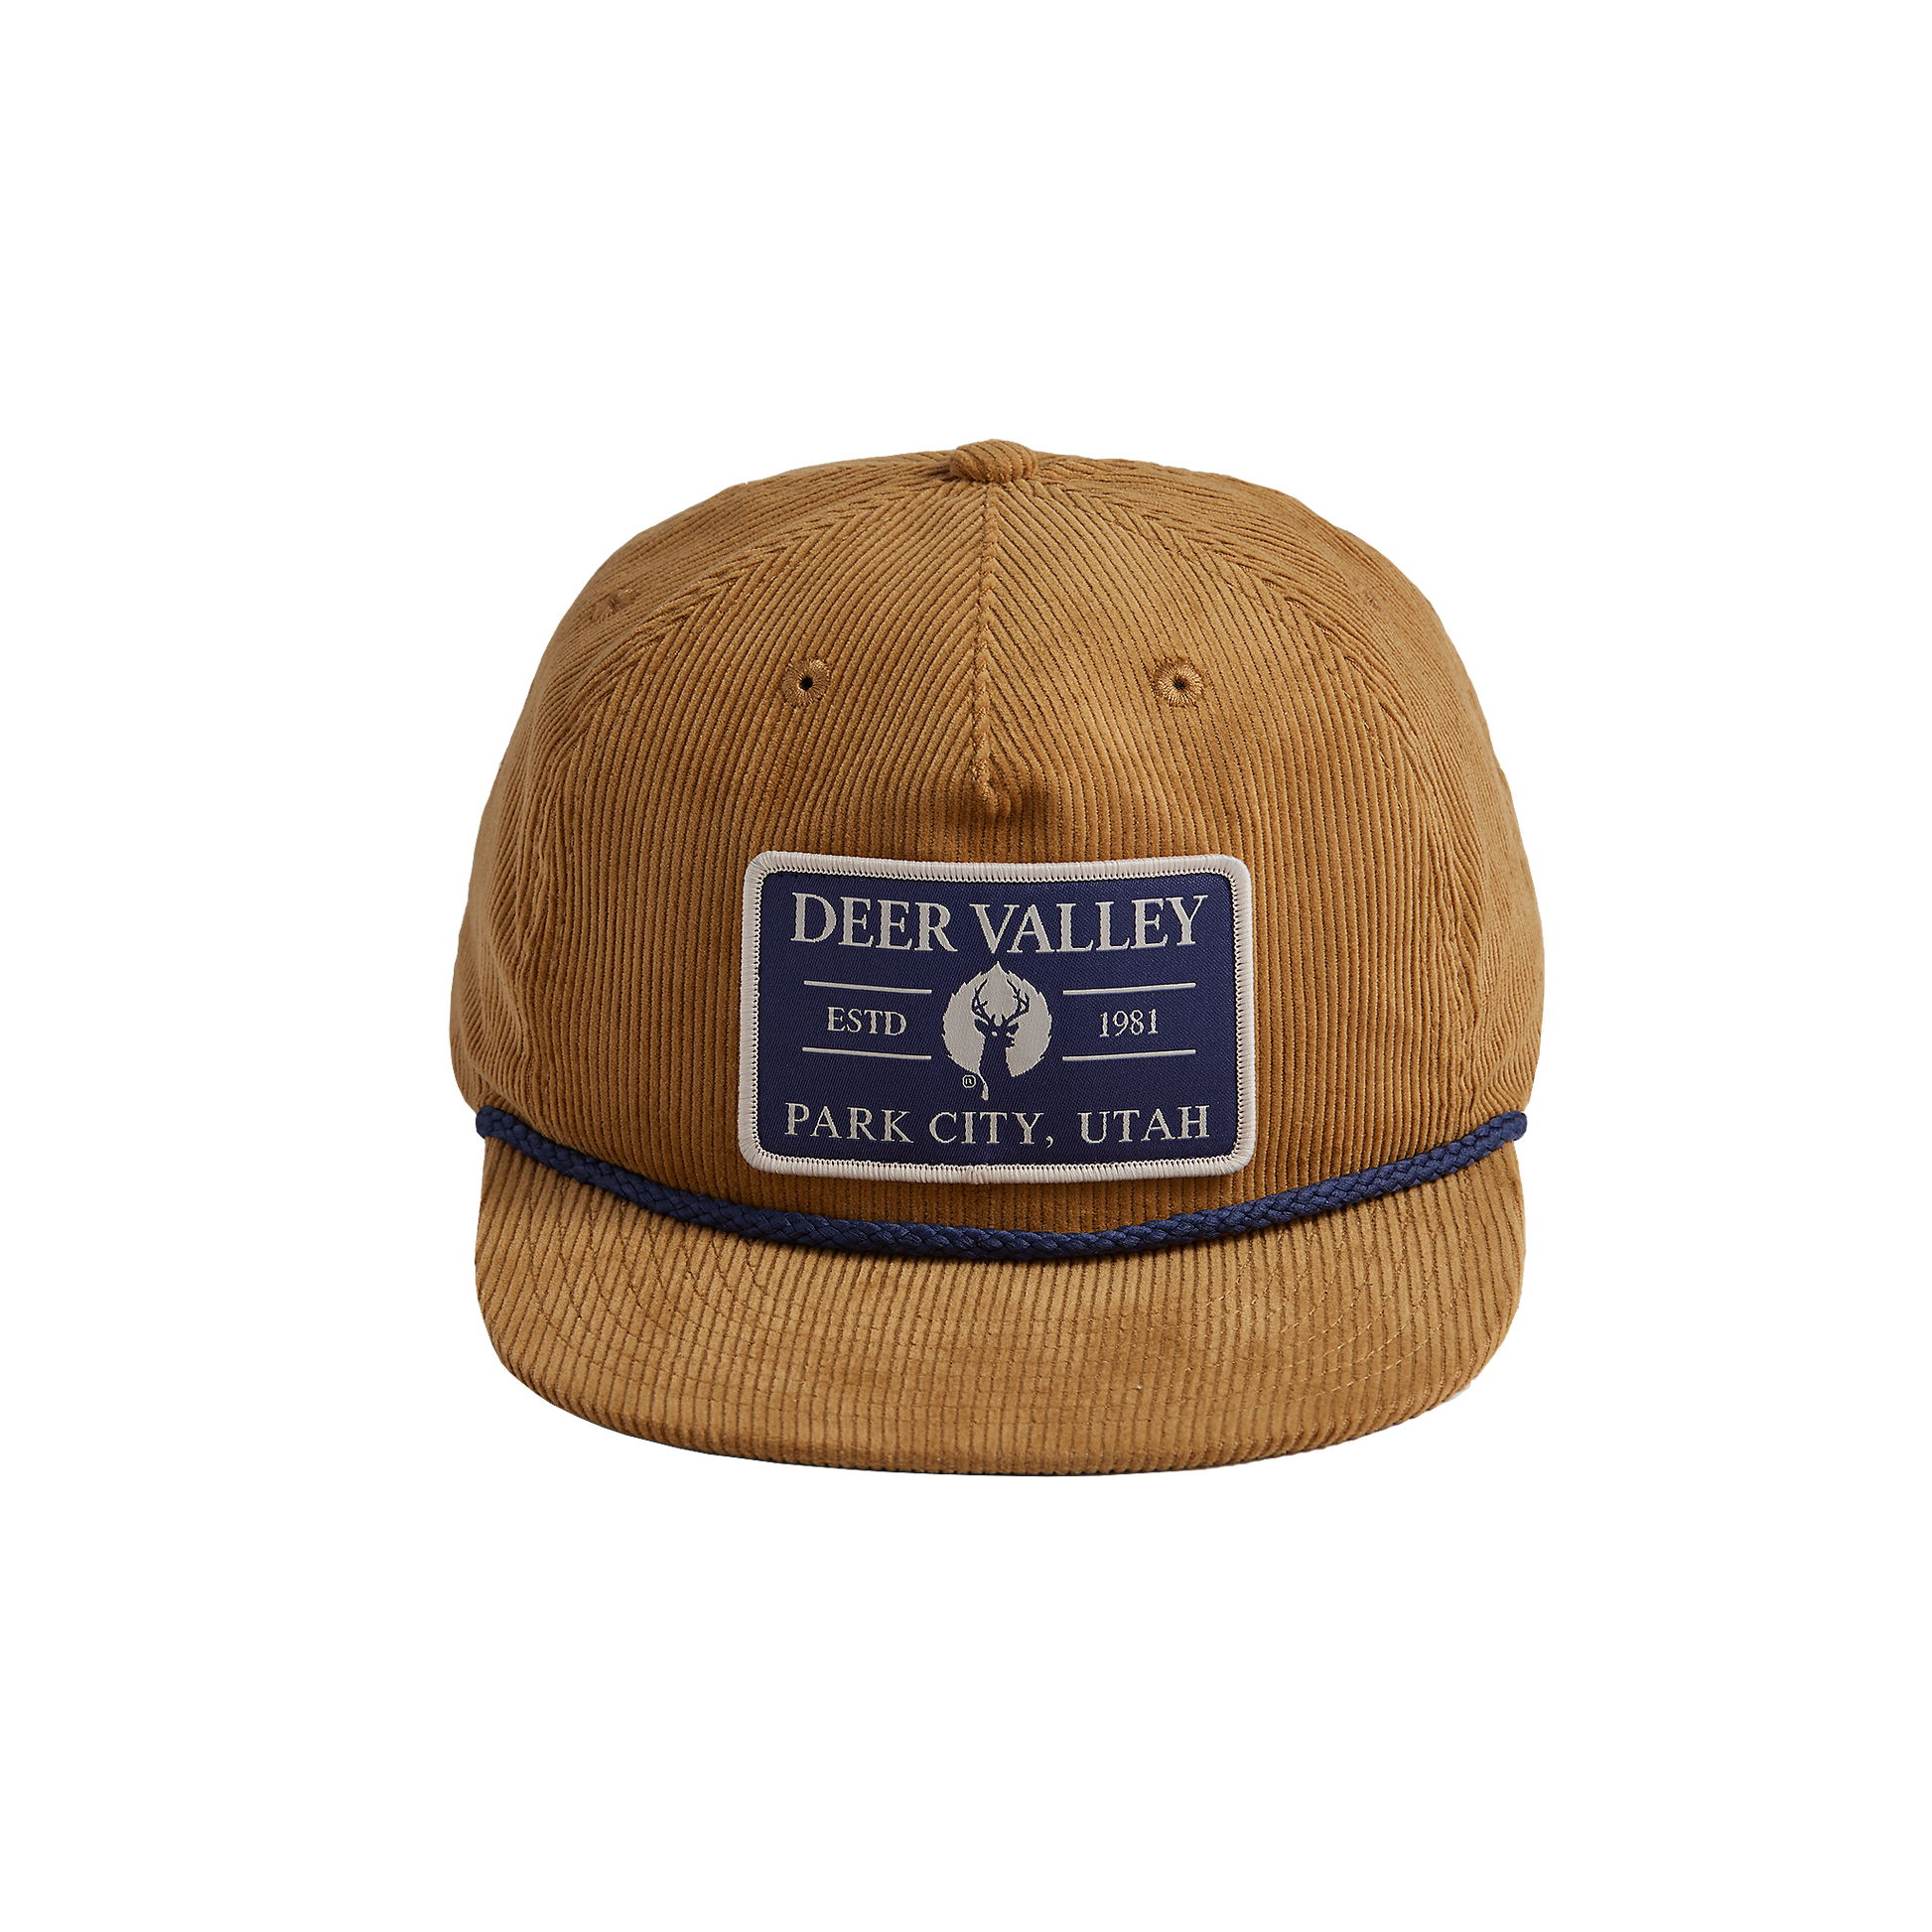 Khaki colored corduroy cap with a blue rope across the brim